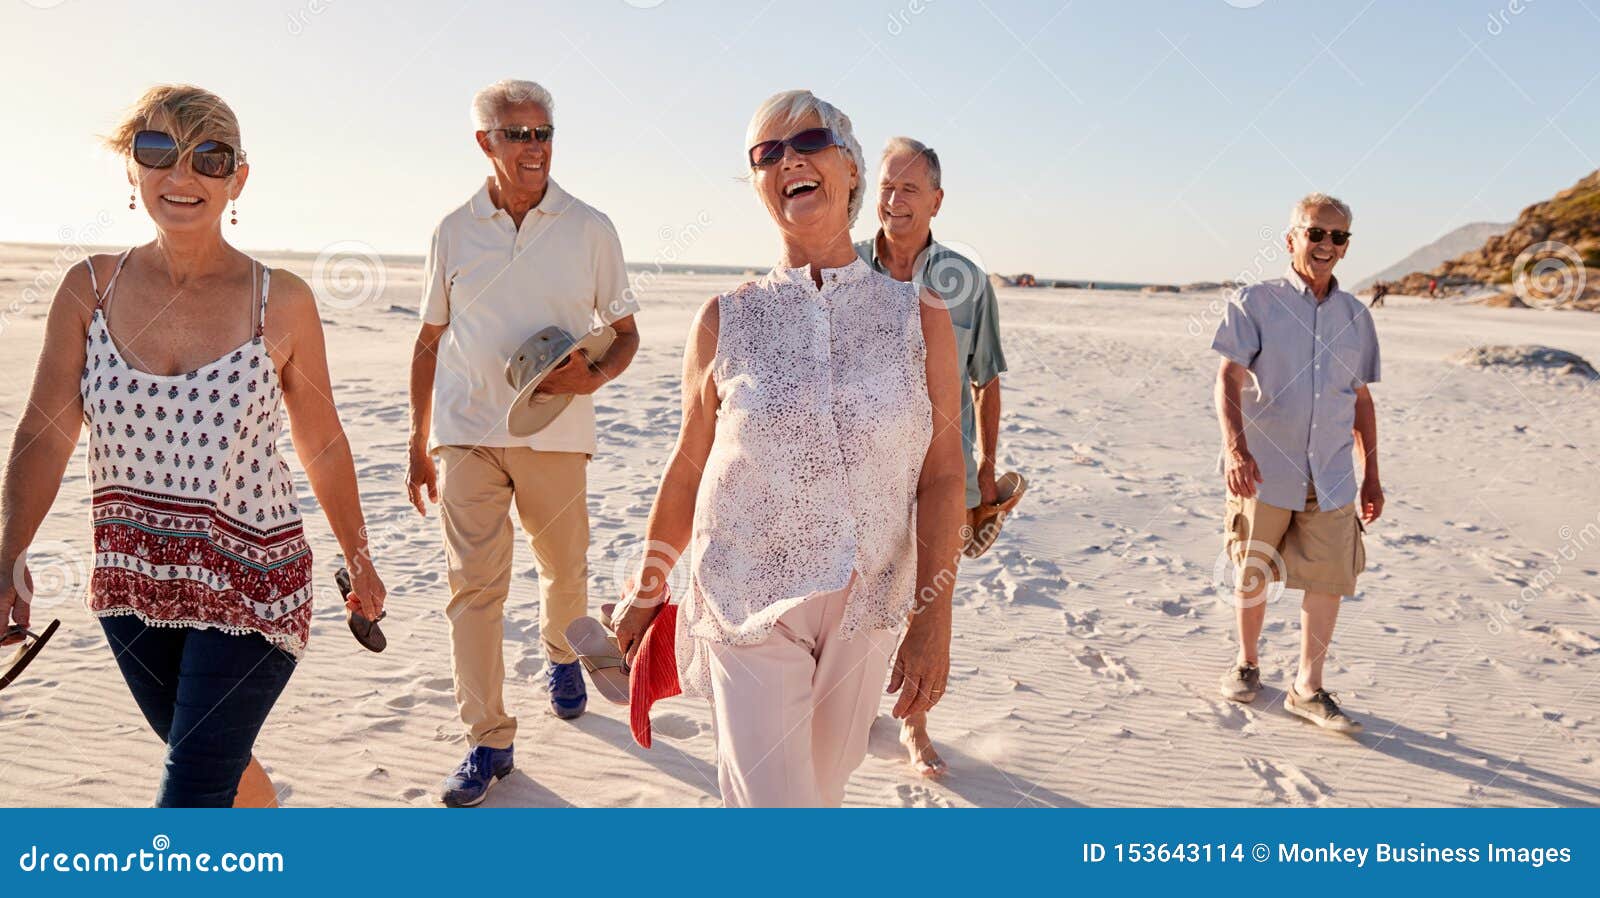 group of senior friends walking along sandy beach on summer group vacation